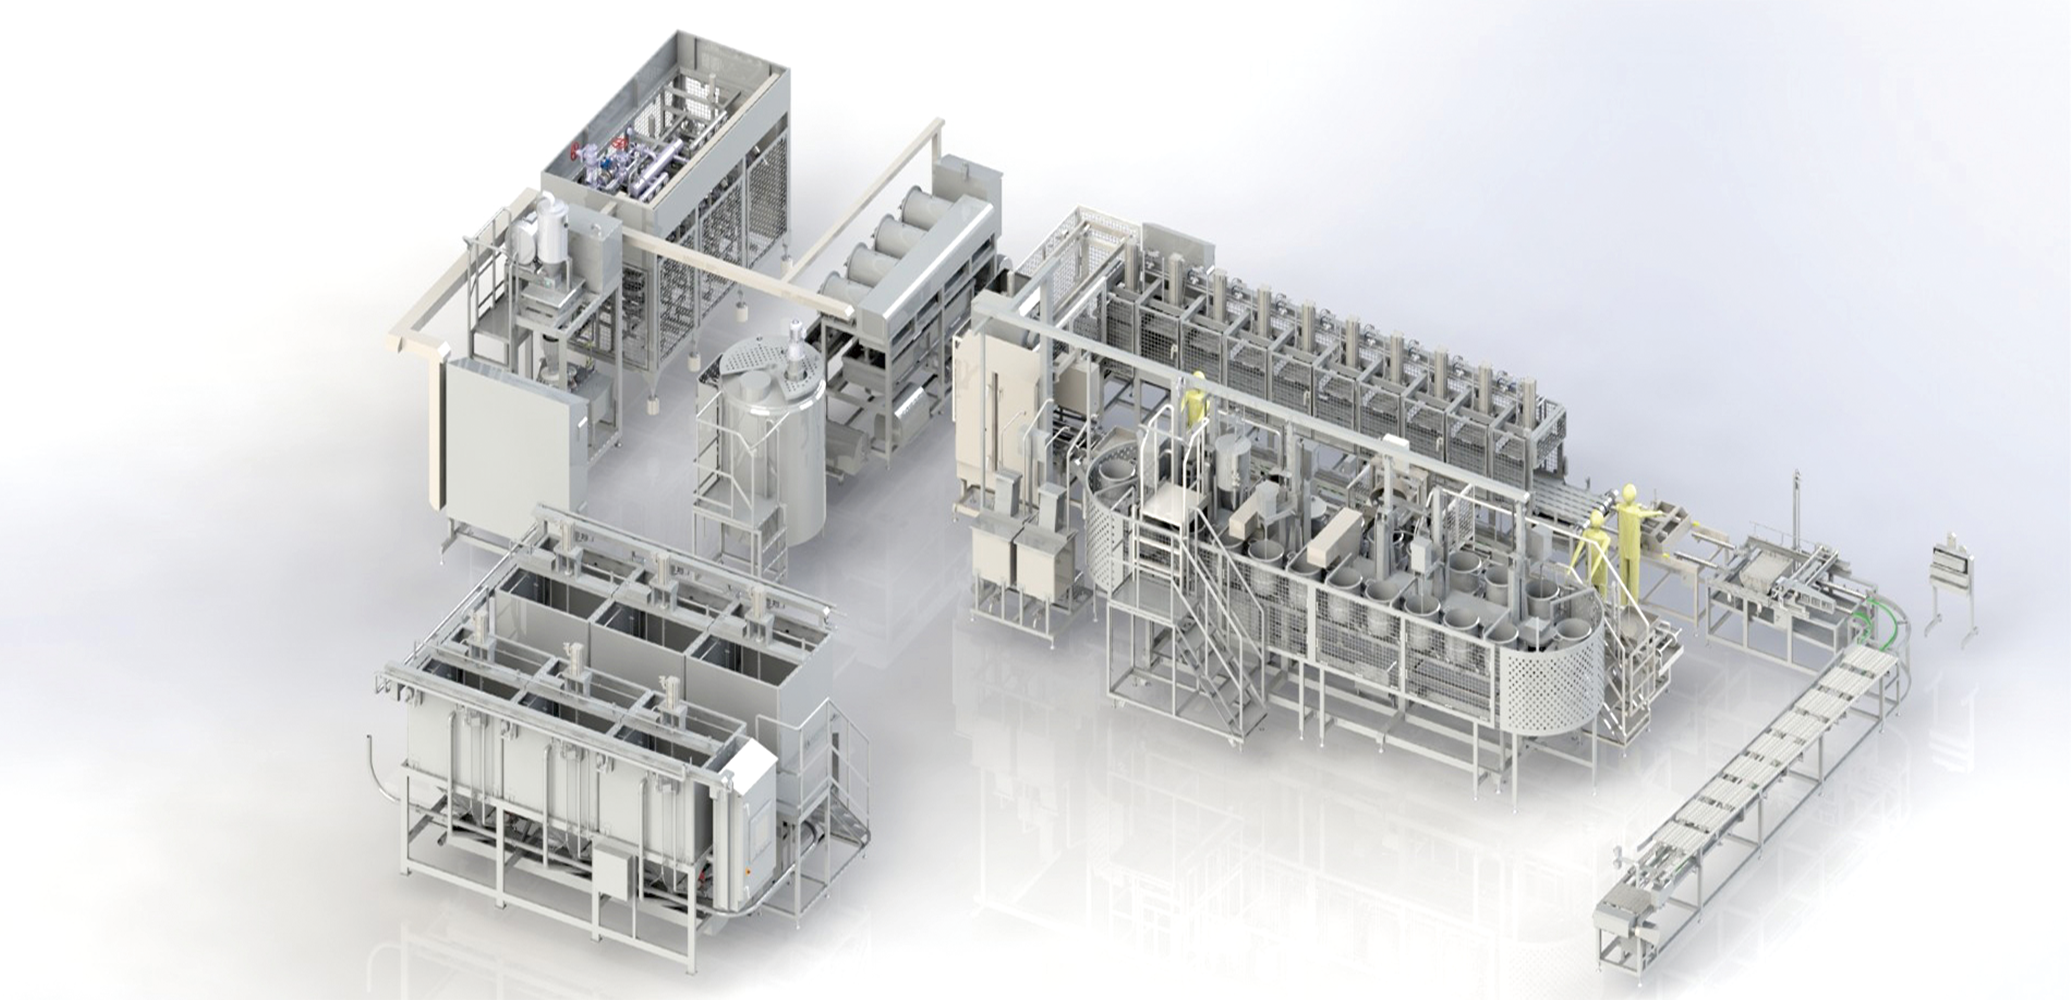 Automatic Tofu and Soymilk Production Line